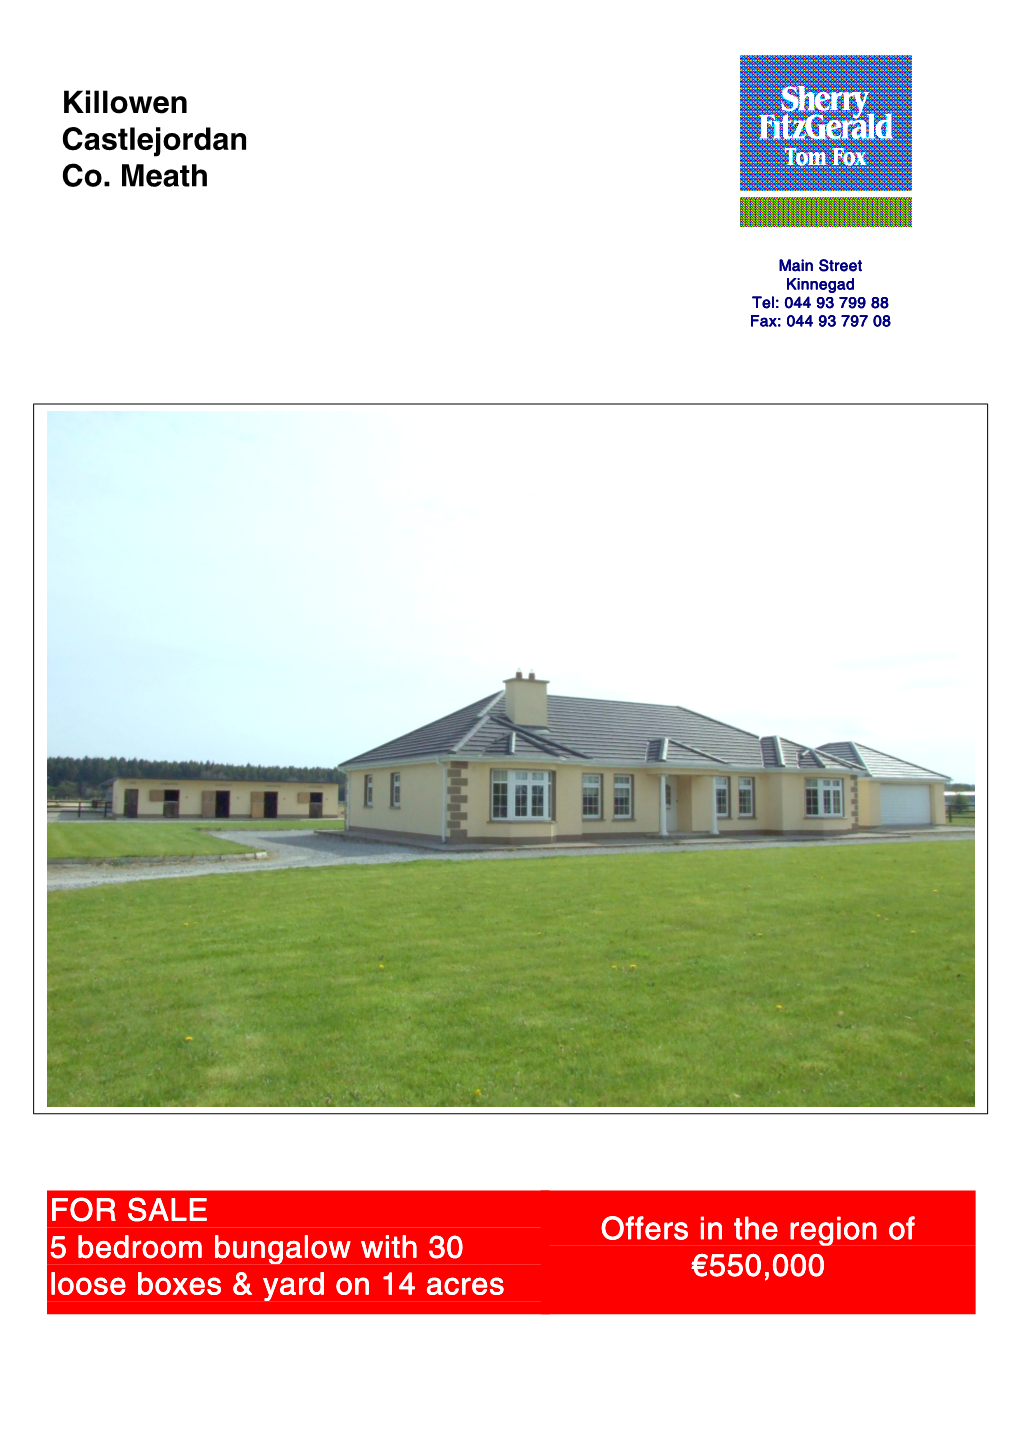 FOR SALE 5 Bedroom Bungalow with 30 Loose Boxes & Yard on 14 Acres